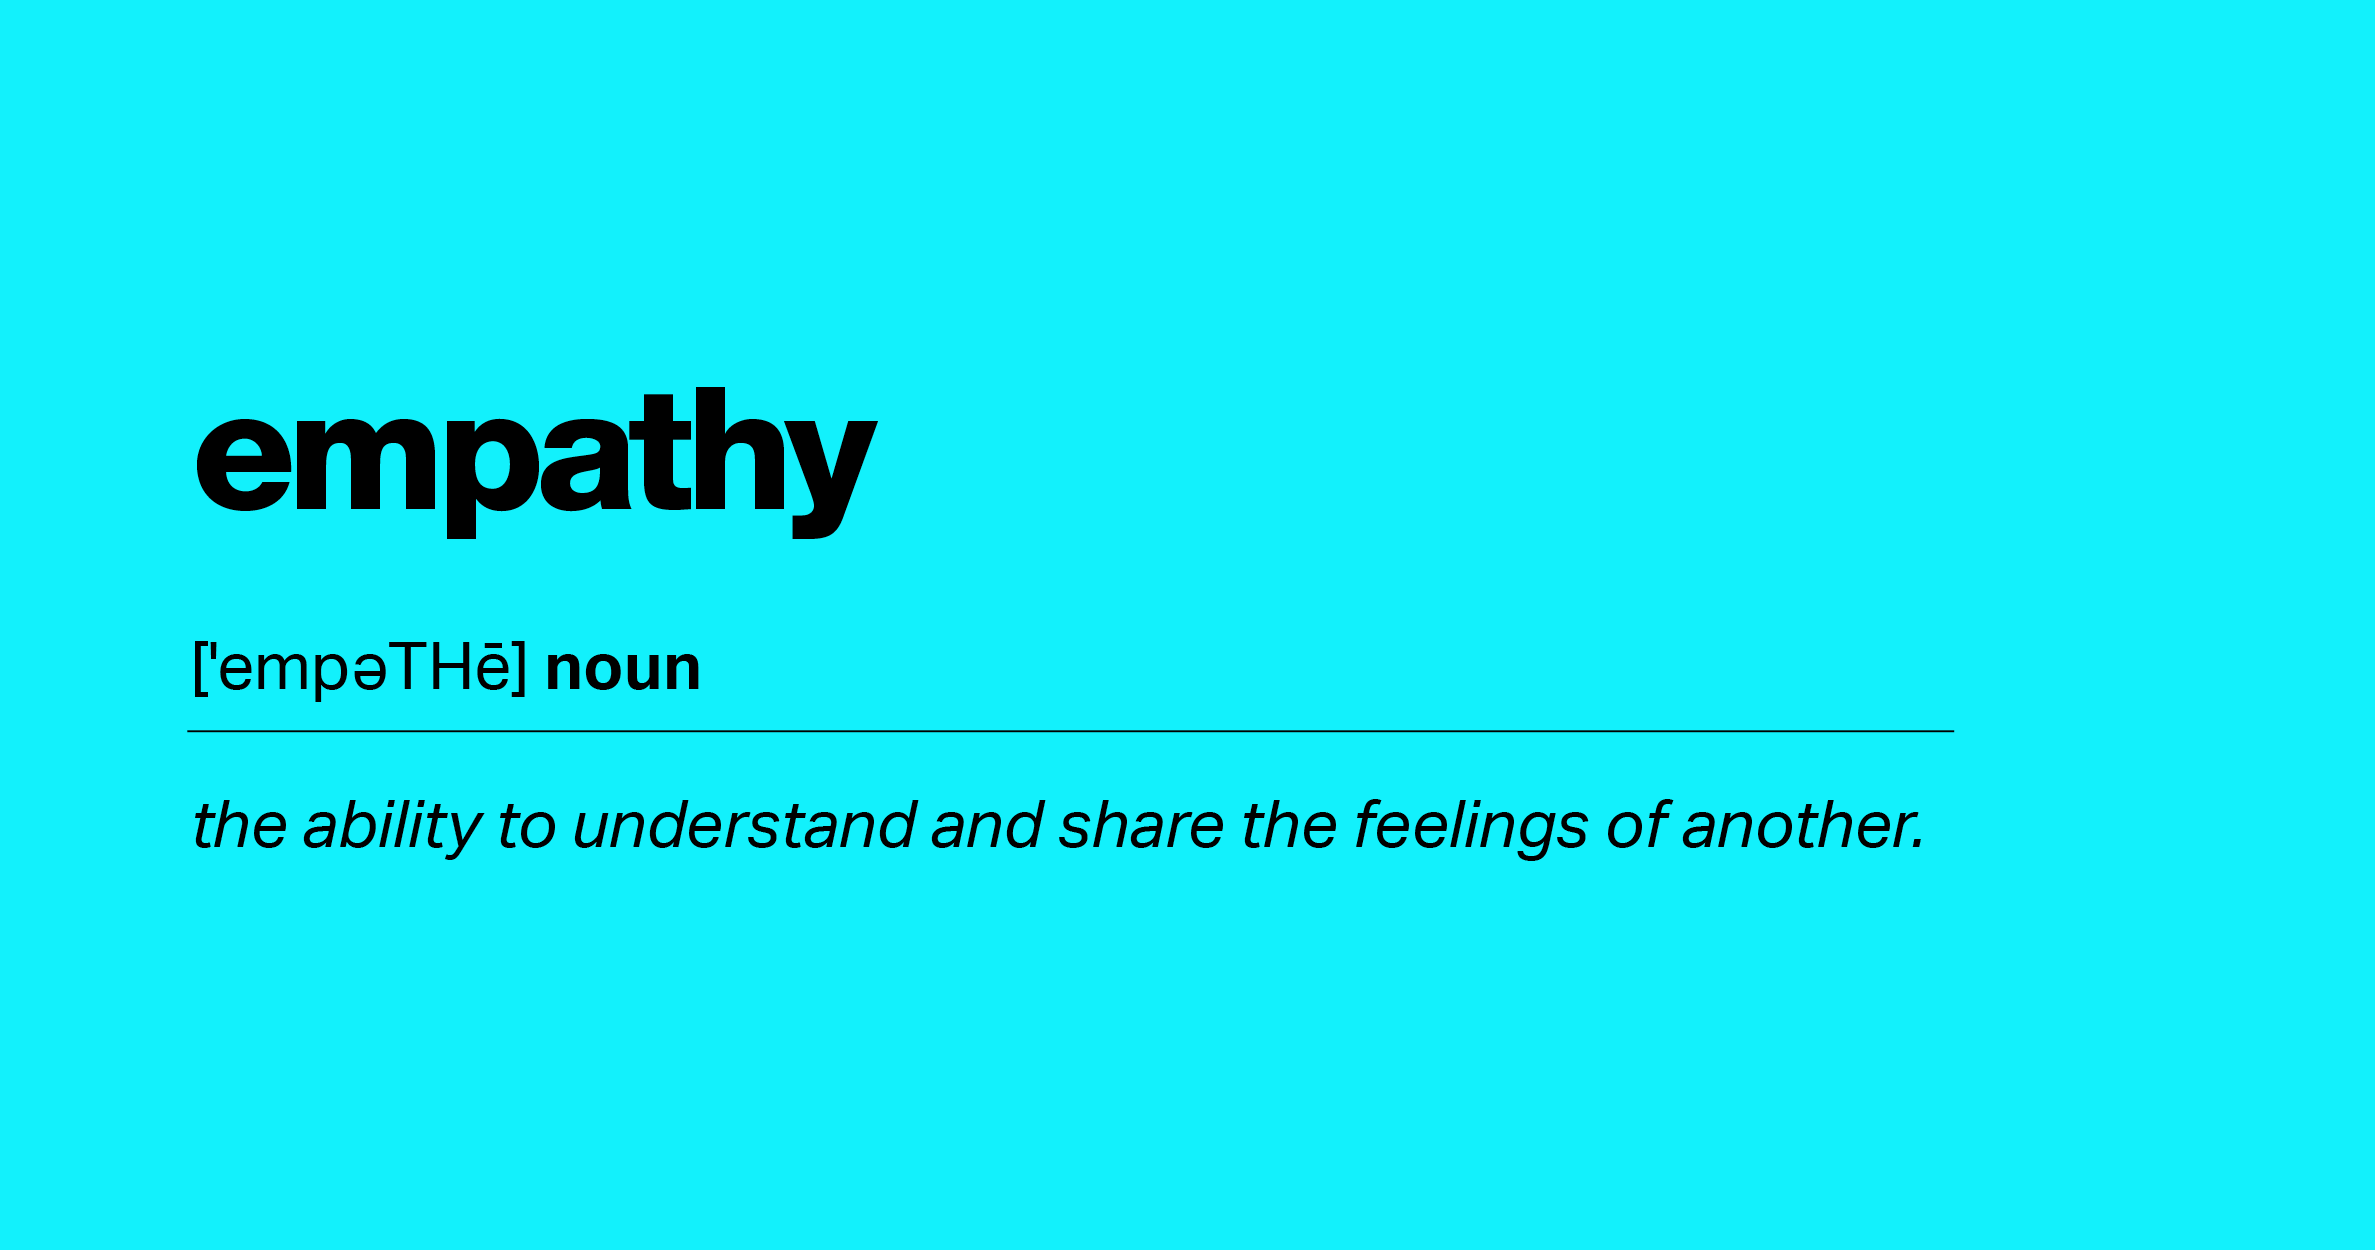 em·pa·thy /ˈempəTHē/ noun the ability to understand and share the feelings of another.